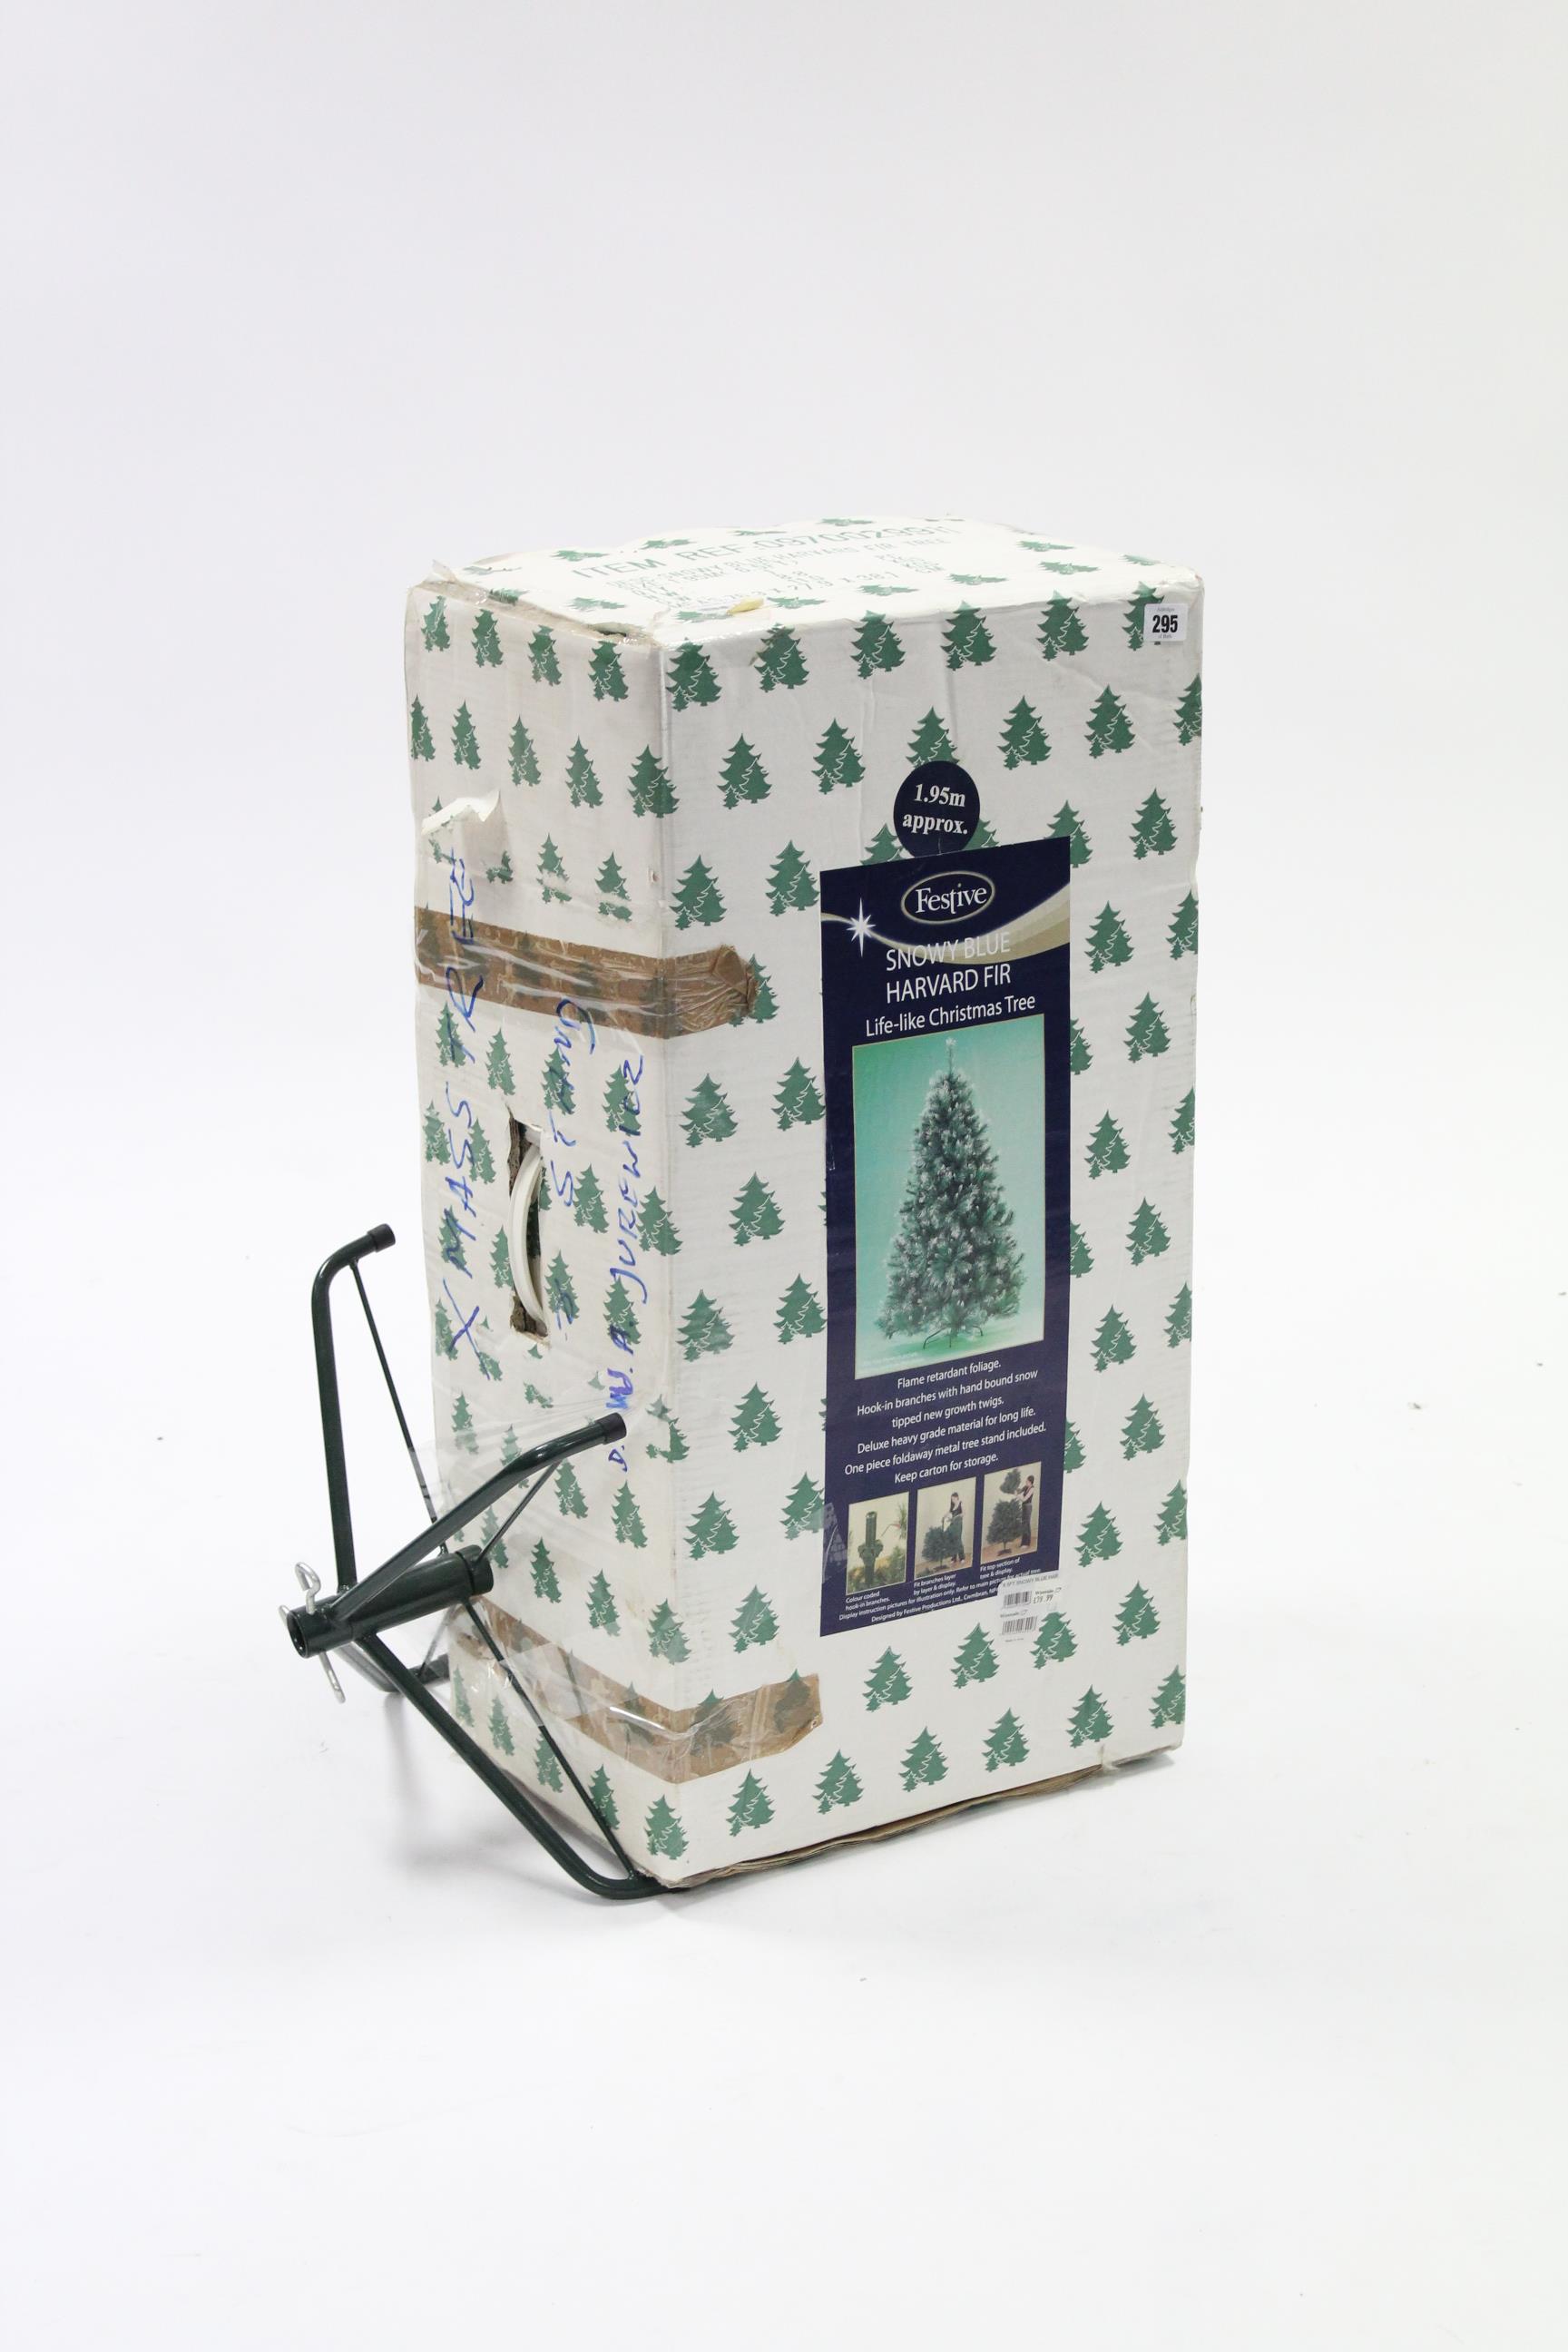 A festive “Snowy Blue Harvard Fir” 1.95m artificial Christmas tree, boxed. - Image 2 of 2